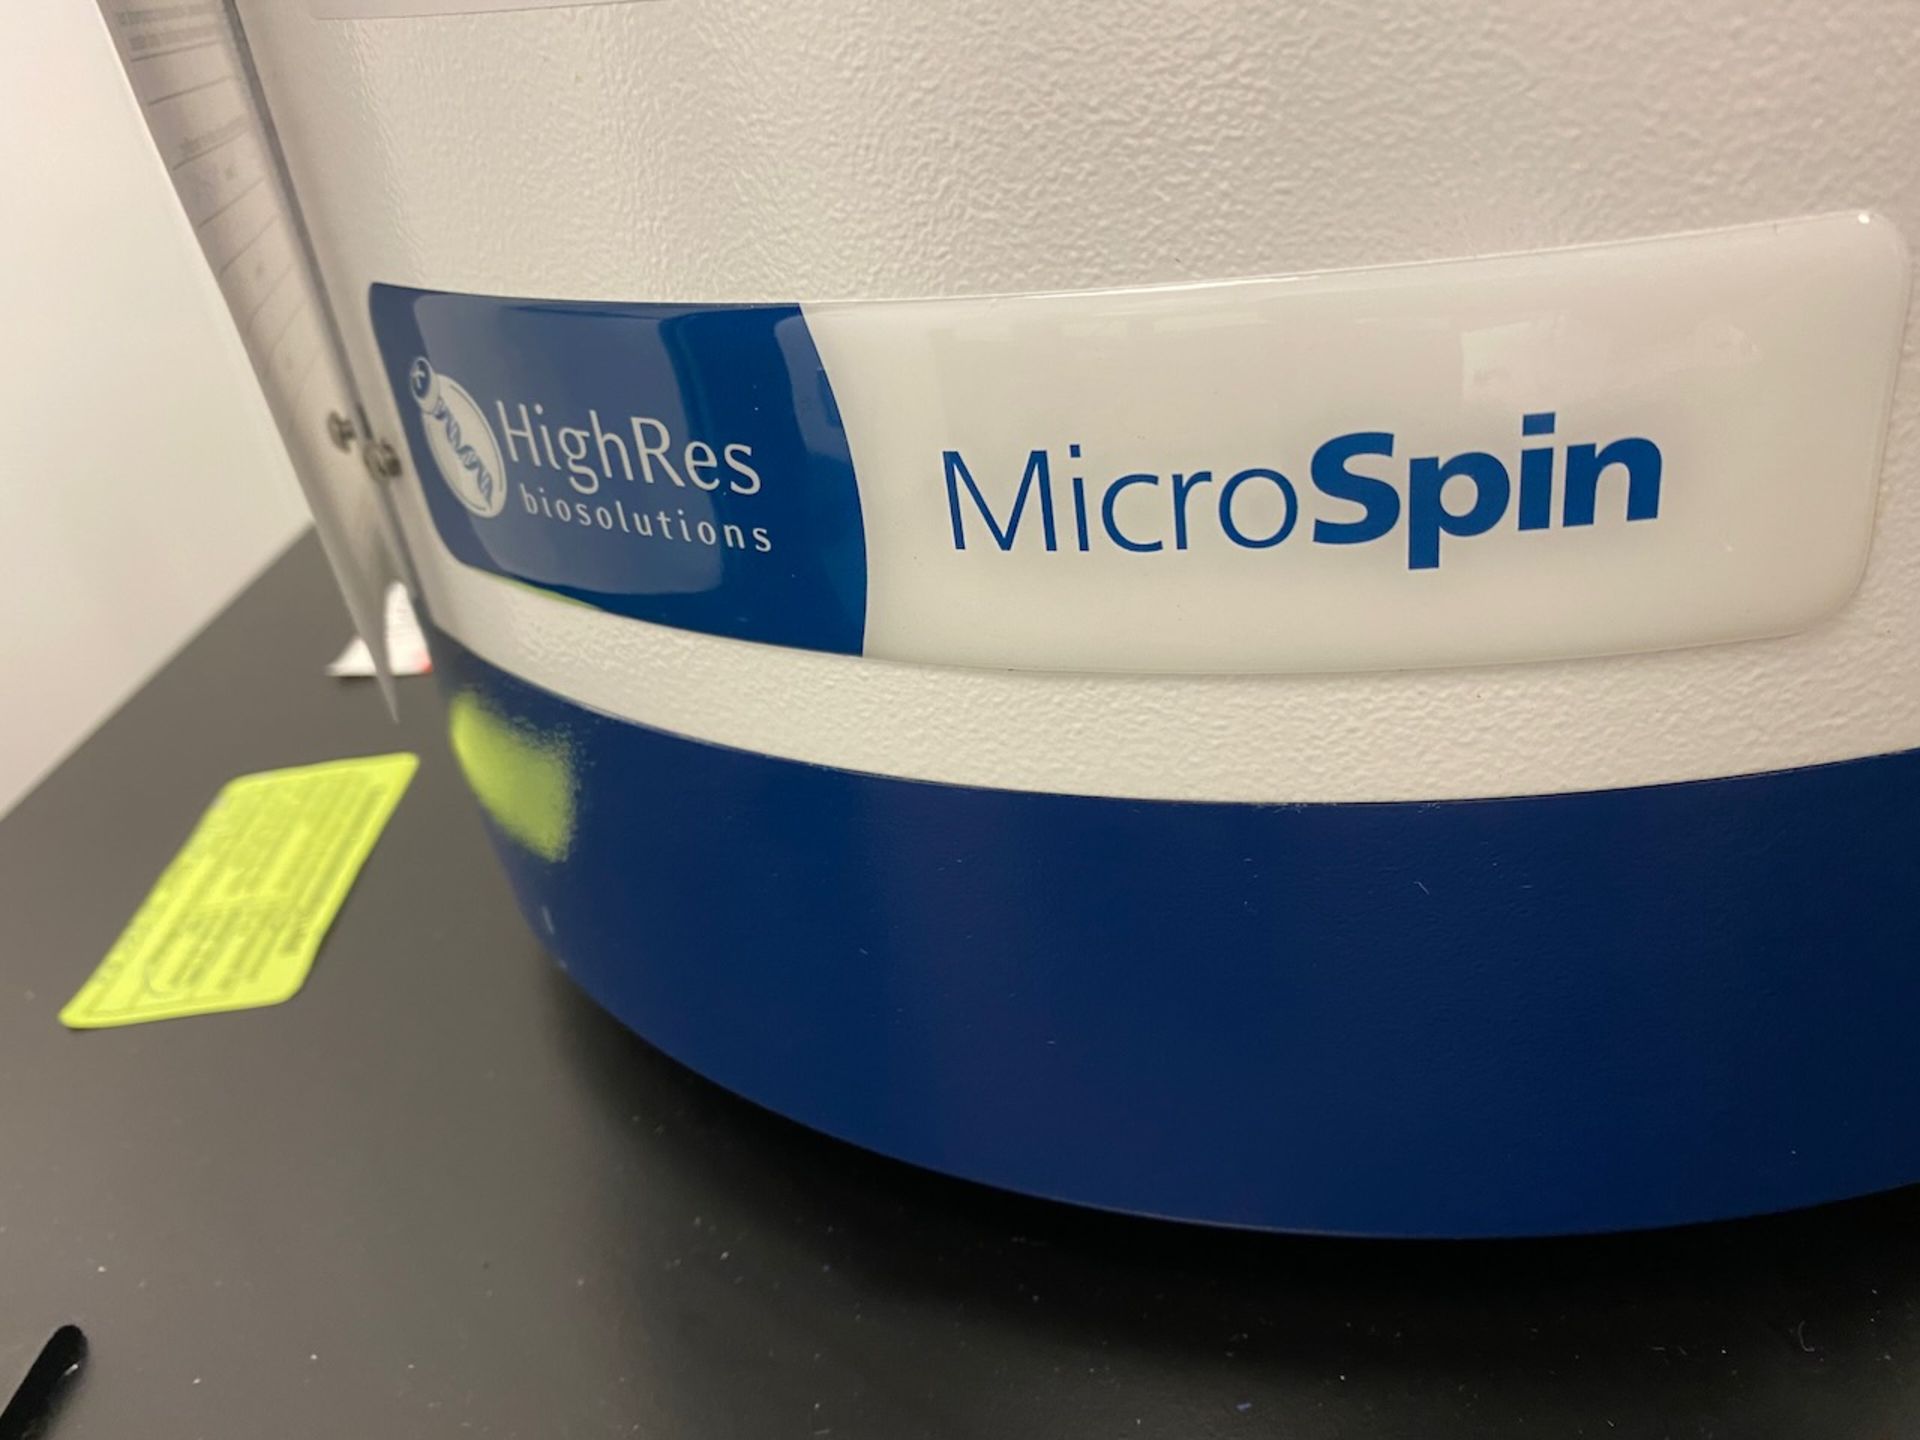 2016 High Res Microspin Centrifuge - Image 4 of 6